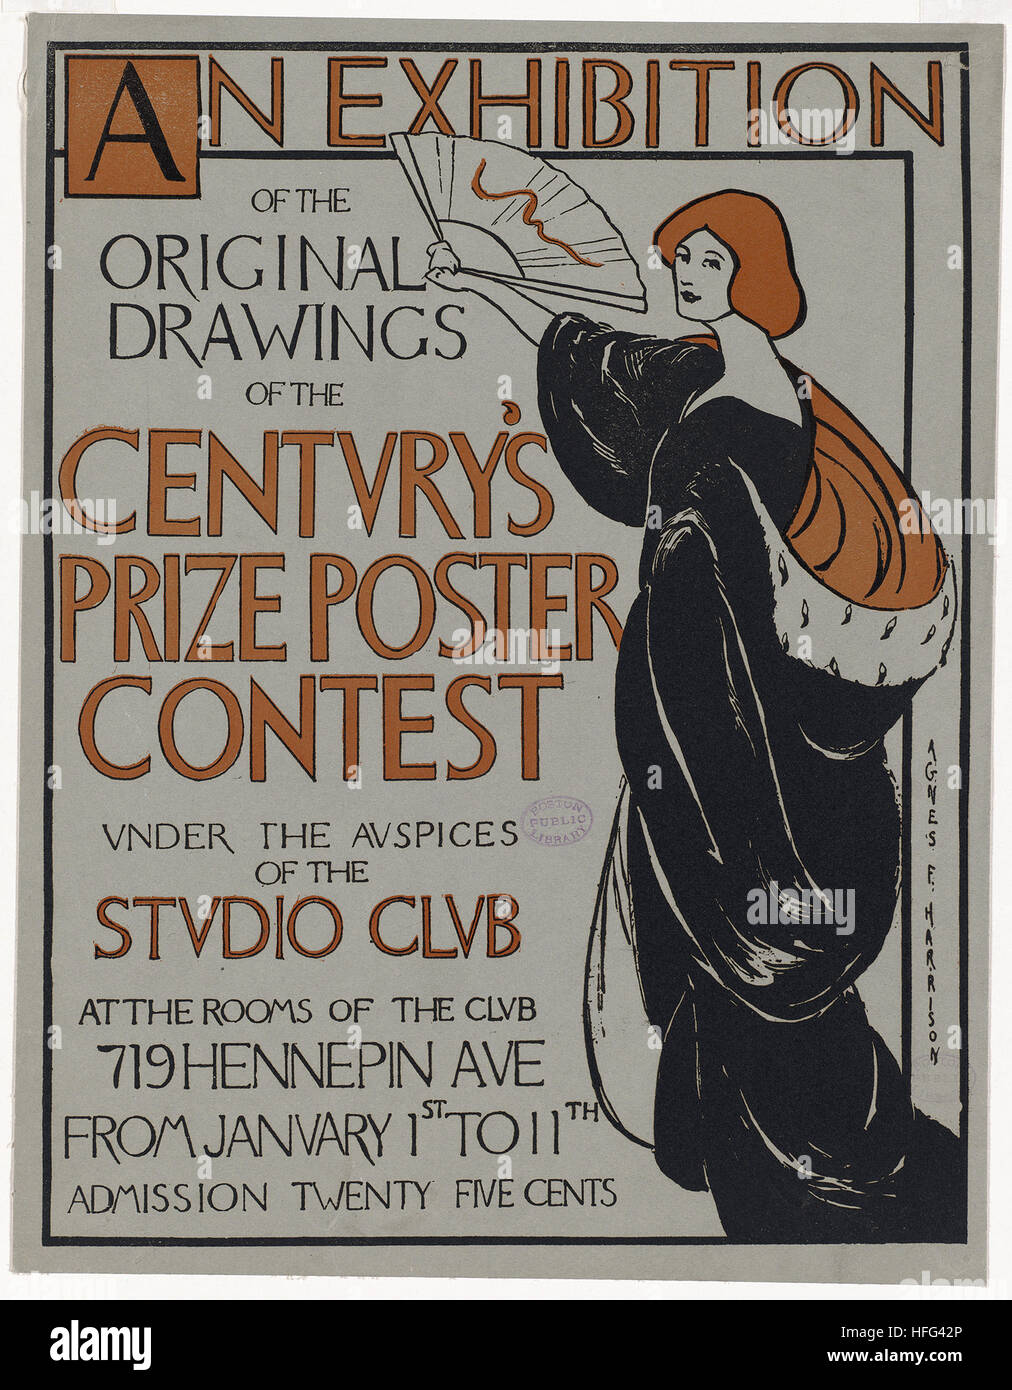 An exhibition of the original drawings of the Century's prize poster contest under the auspices of the Studio Club Stock Photo